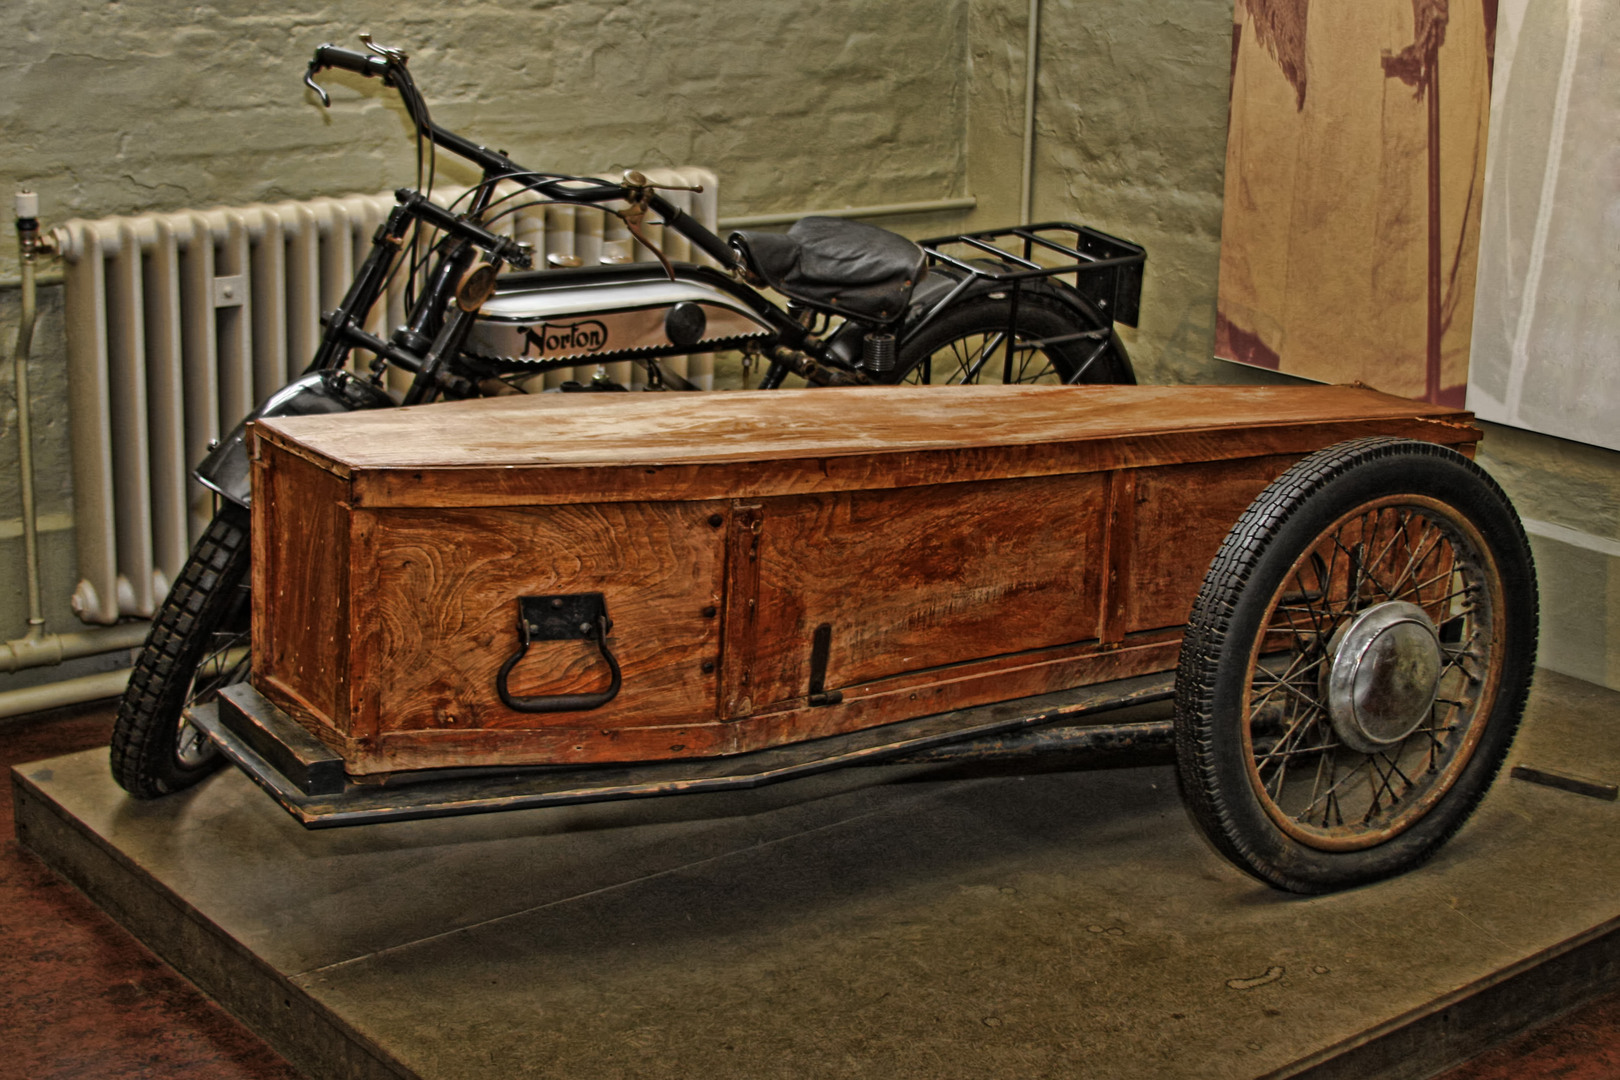 Norton Motorcycle and side coffin at the Norfolk Rural Life Museum. Possibly the oldest motorcycle hearse